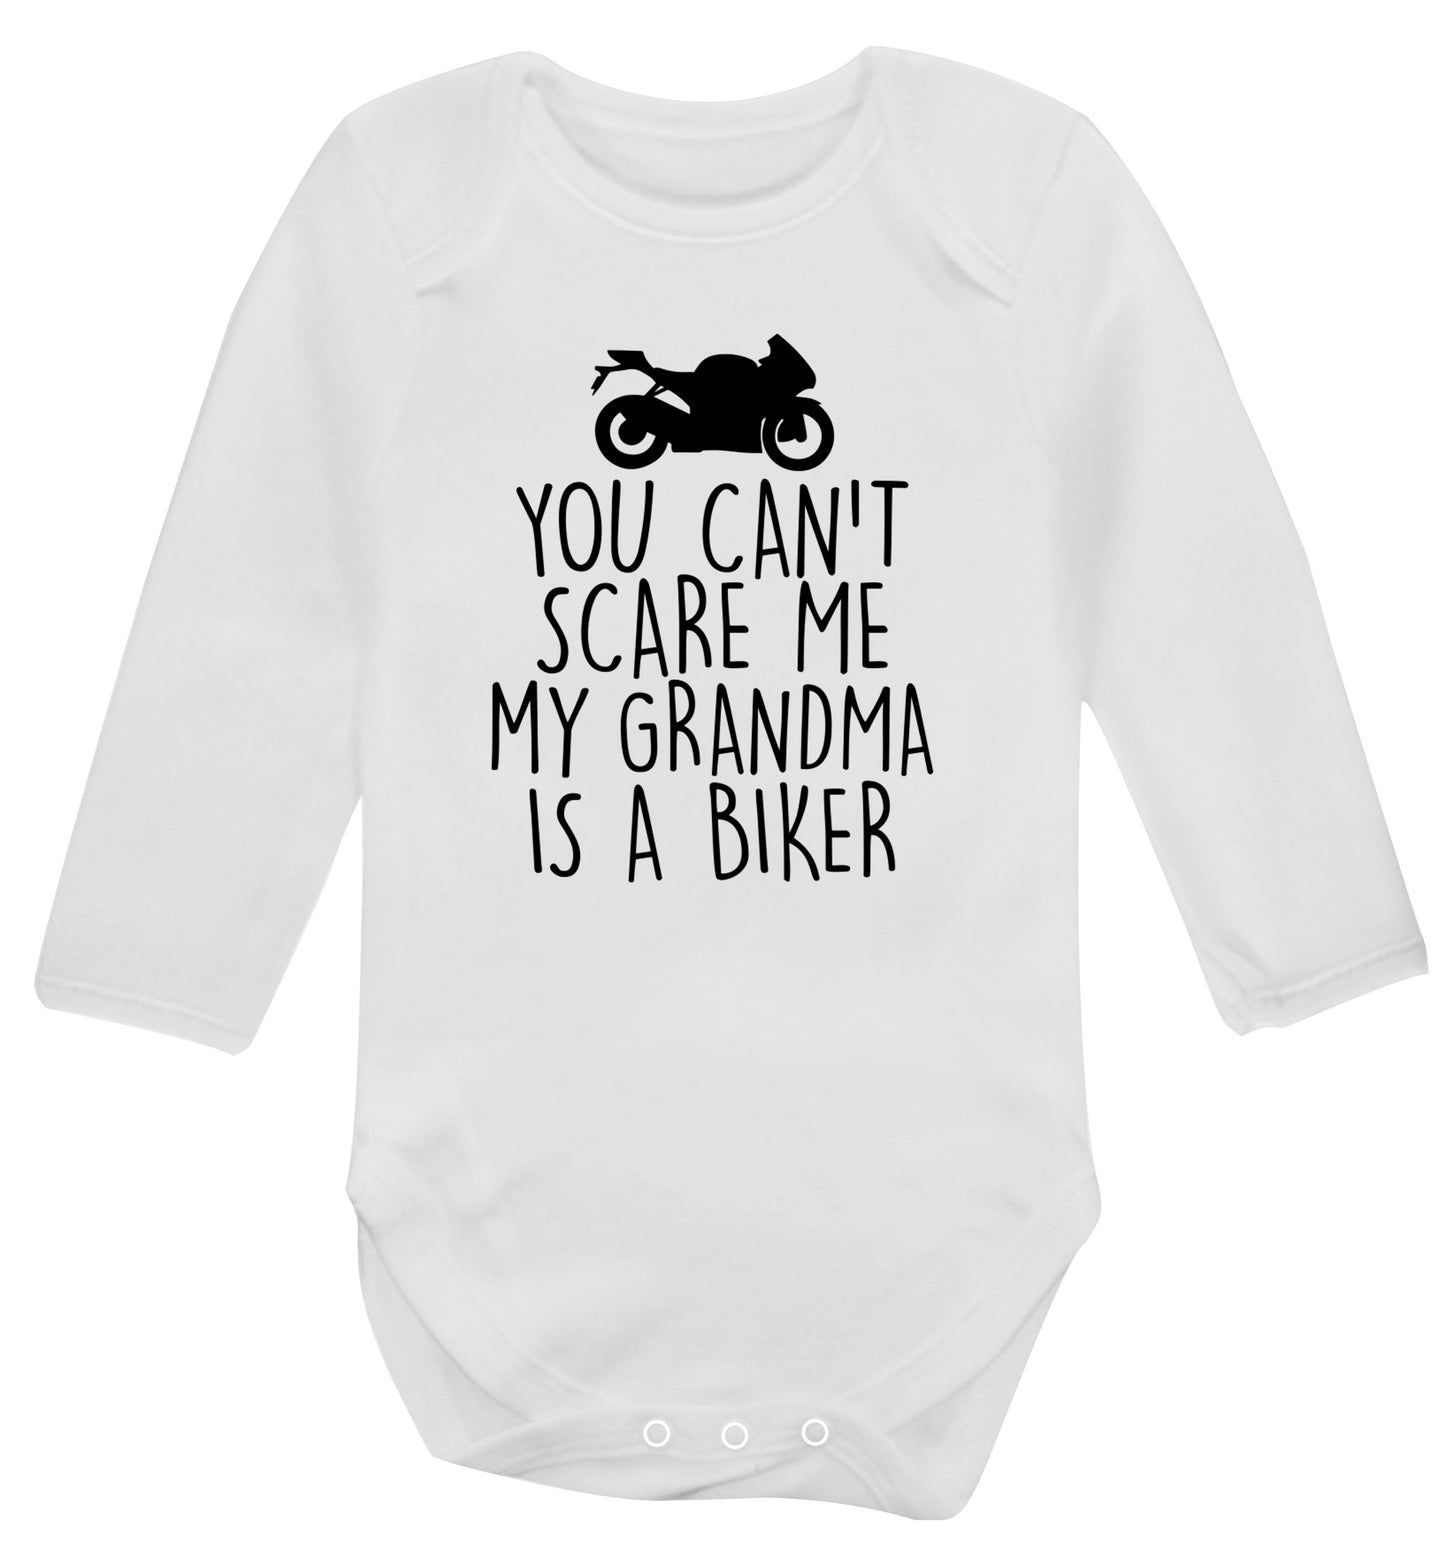 You can't scare me my grandma is a biker Baby Vest long sleeved white 6-12 months